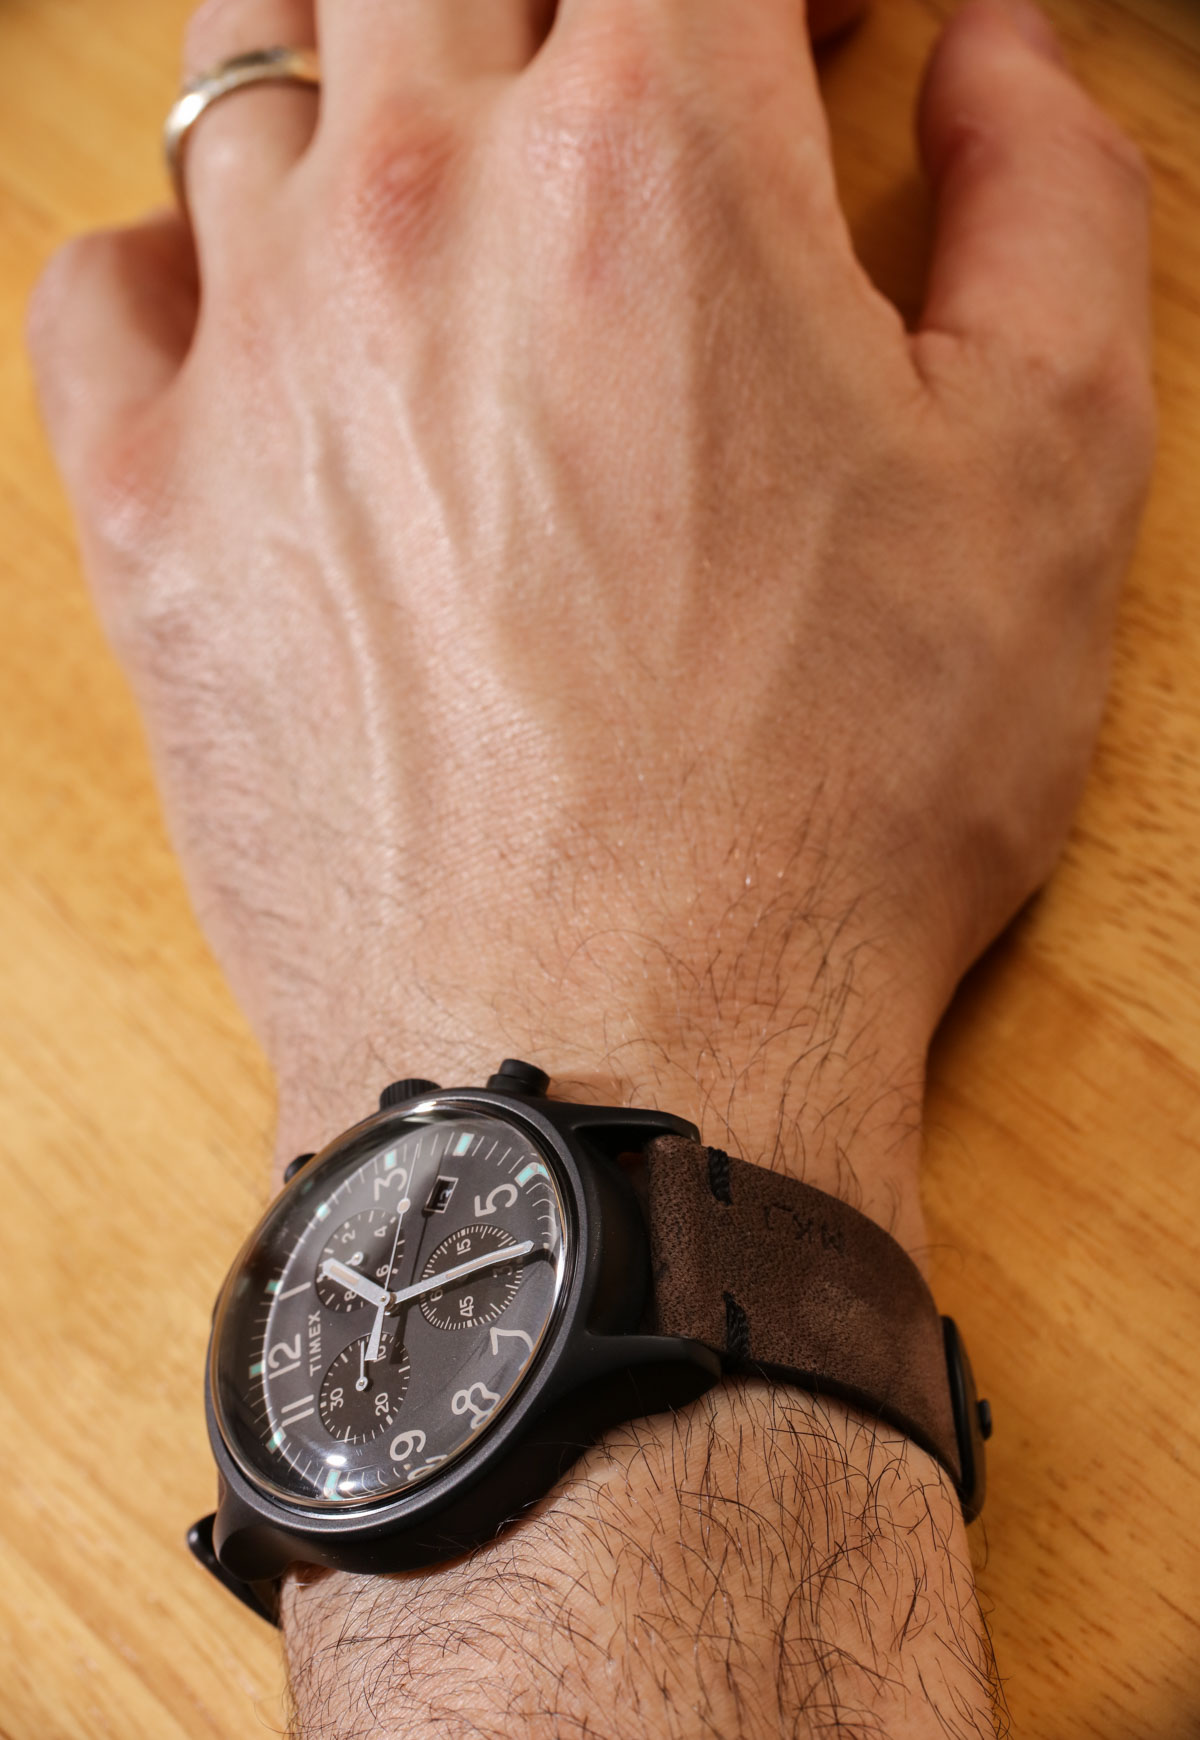 Timex MK1 Steel Chronograph 42mm Watch Review | Page 2 of 2 | aBlogtoWatch